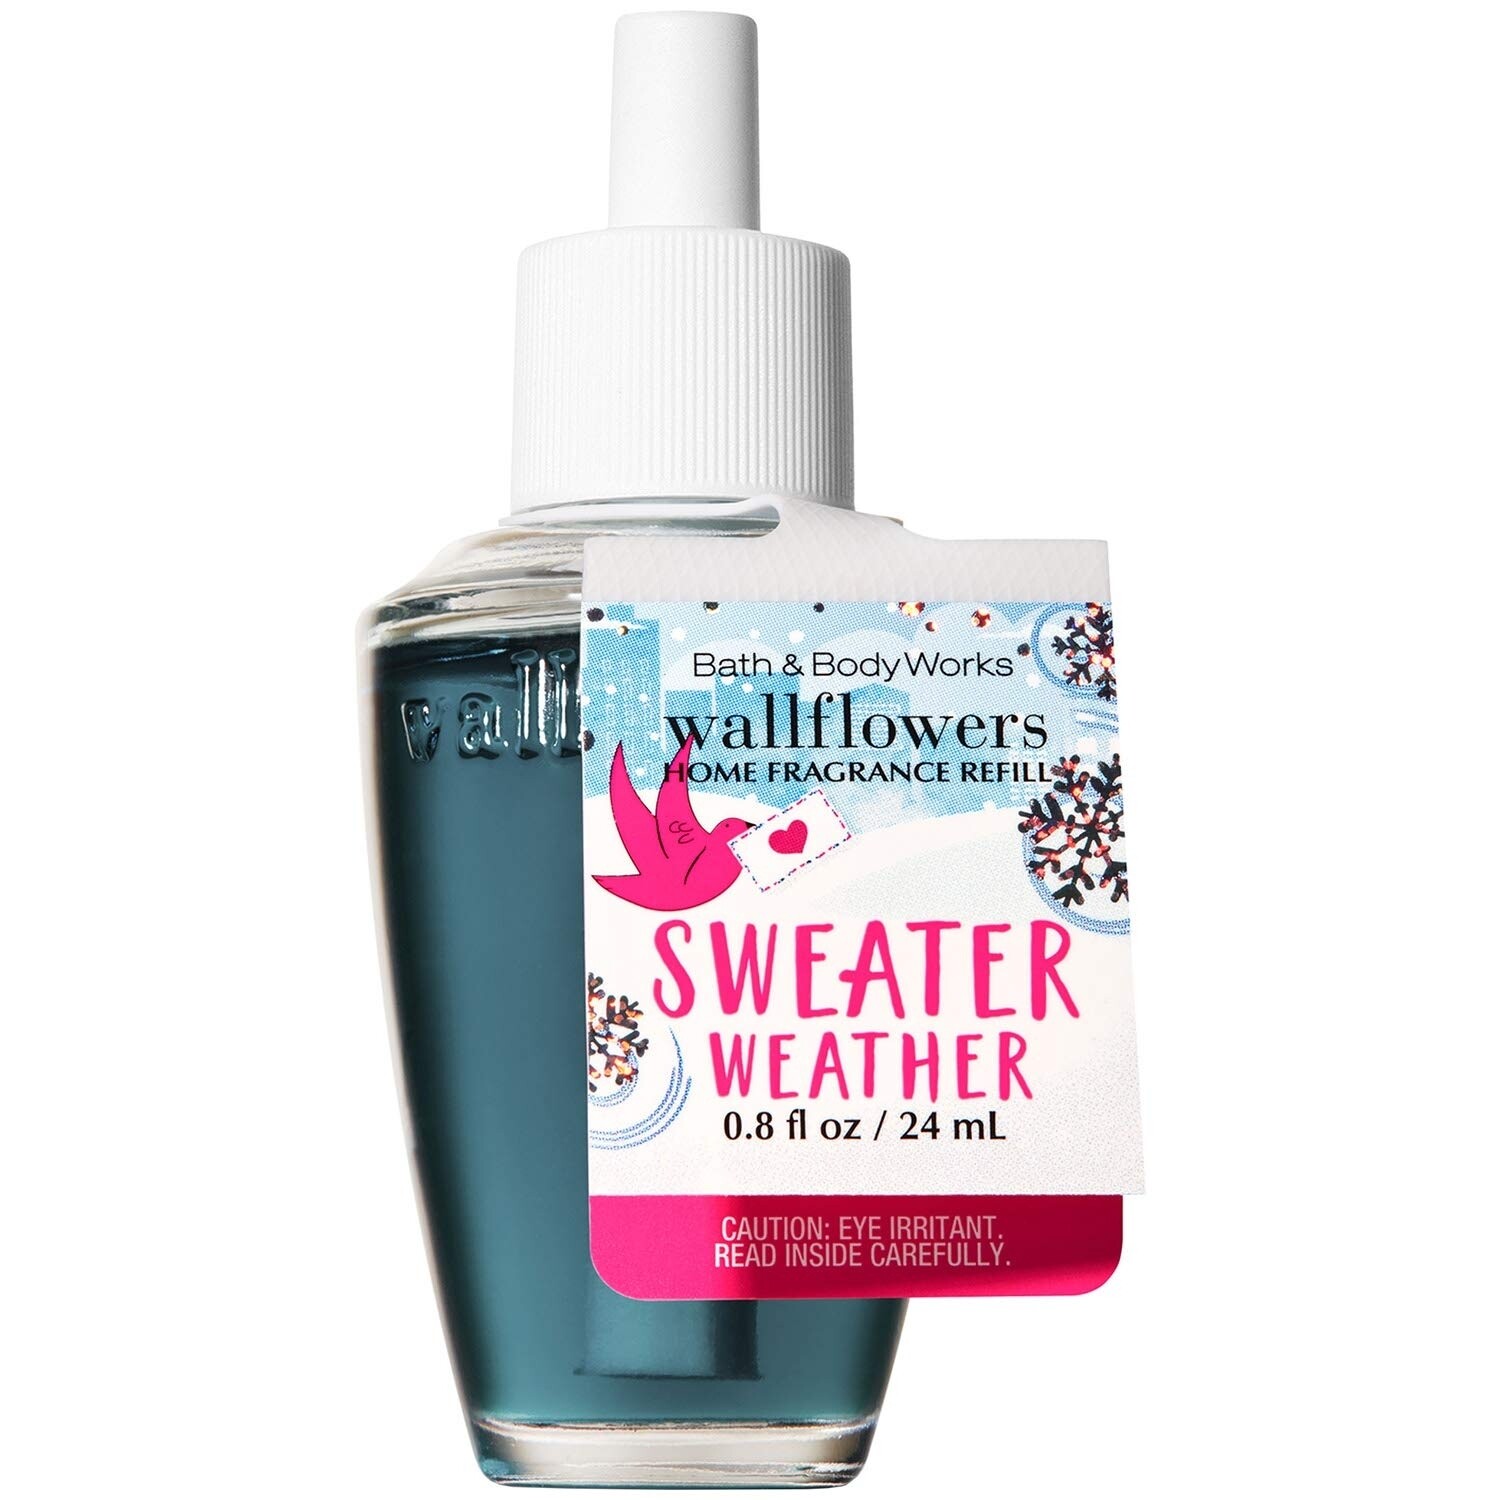 Bath and body works wallflower refill- sweater weather 